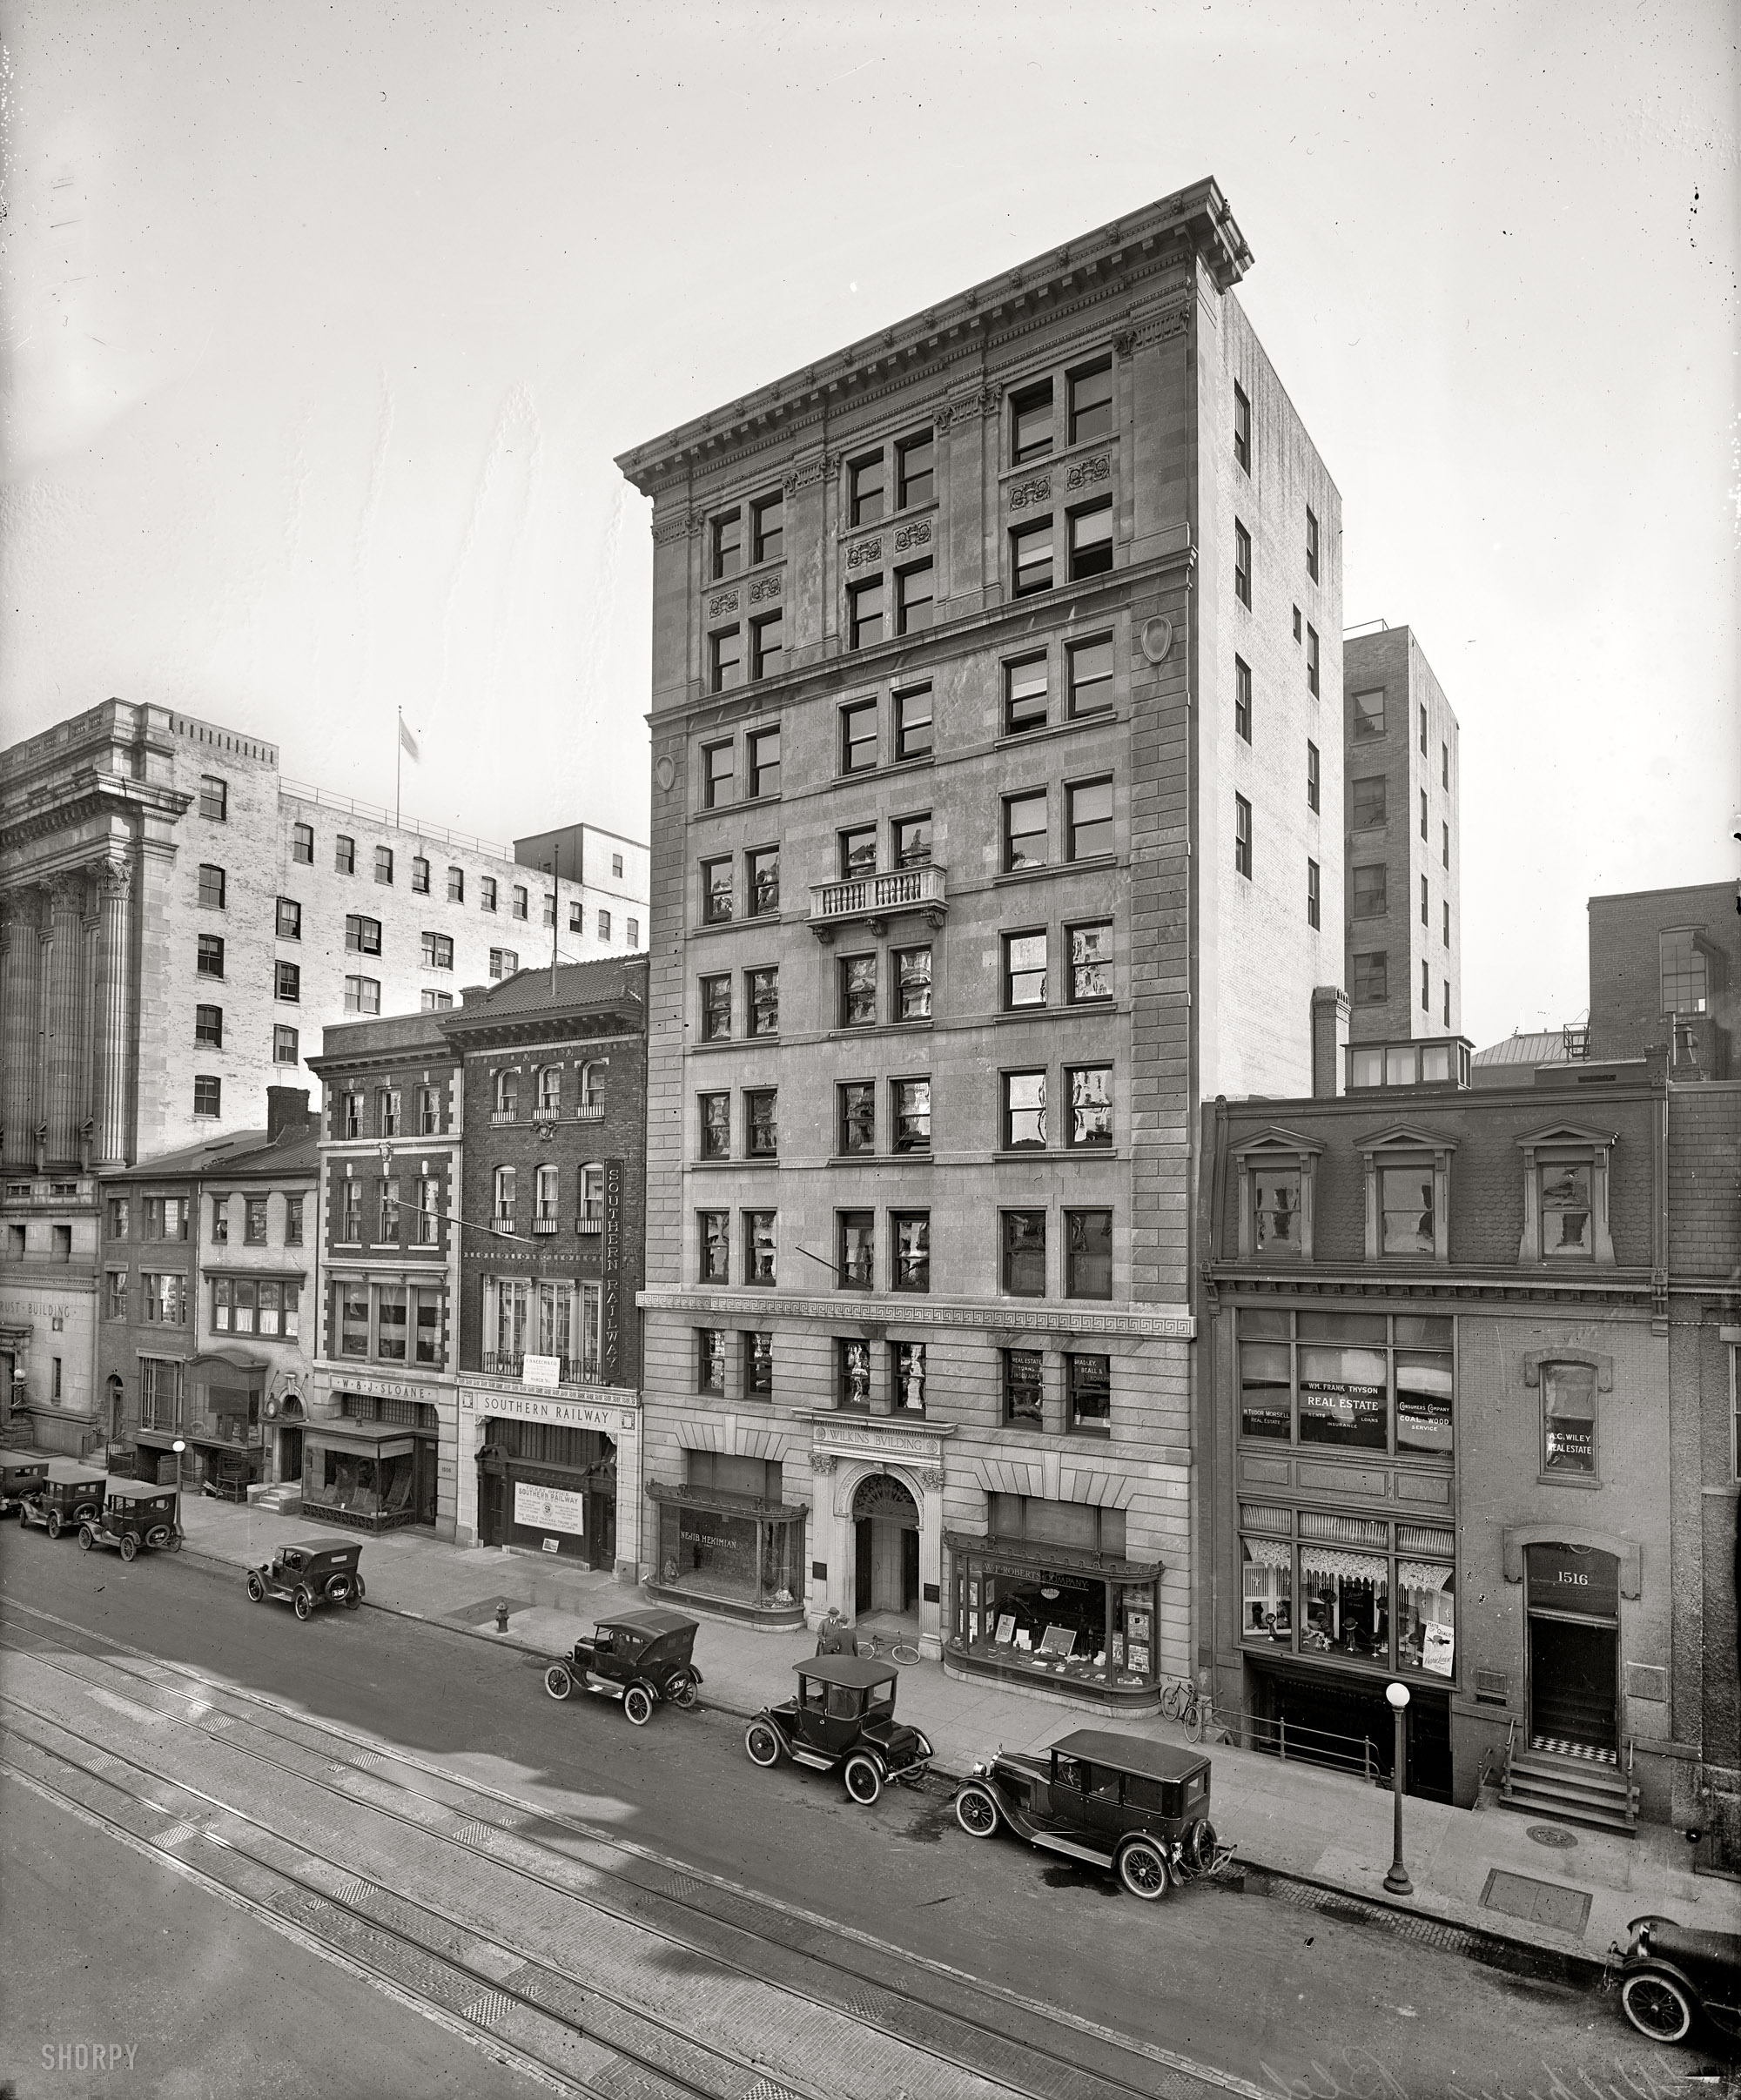 Washington circa 1924. "Wilkins Building, 1514 H Street." With a ghost strolling past the hydrant. National Photo Company glass negative. View full size.